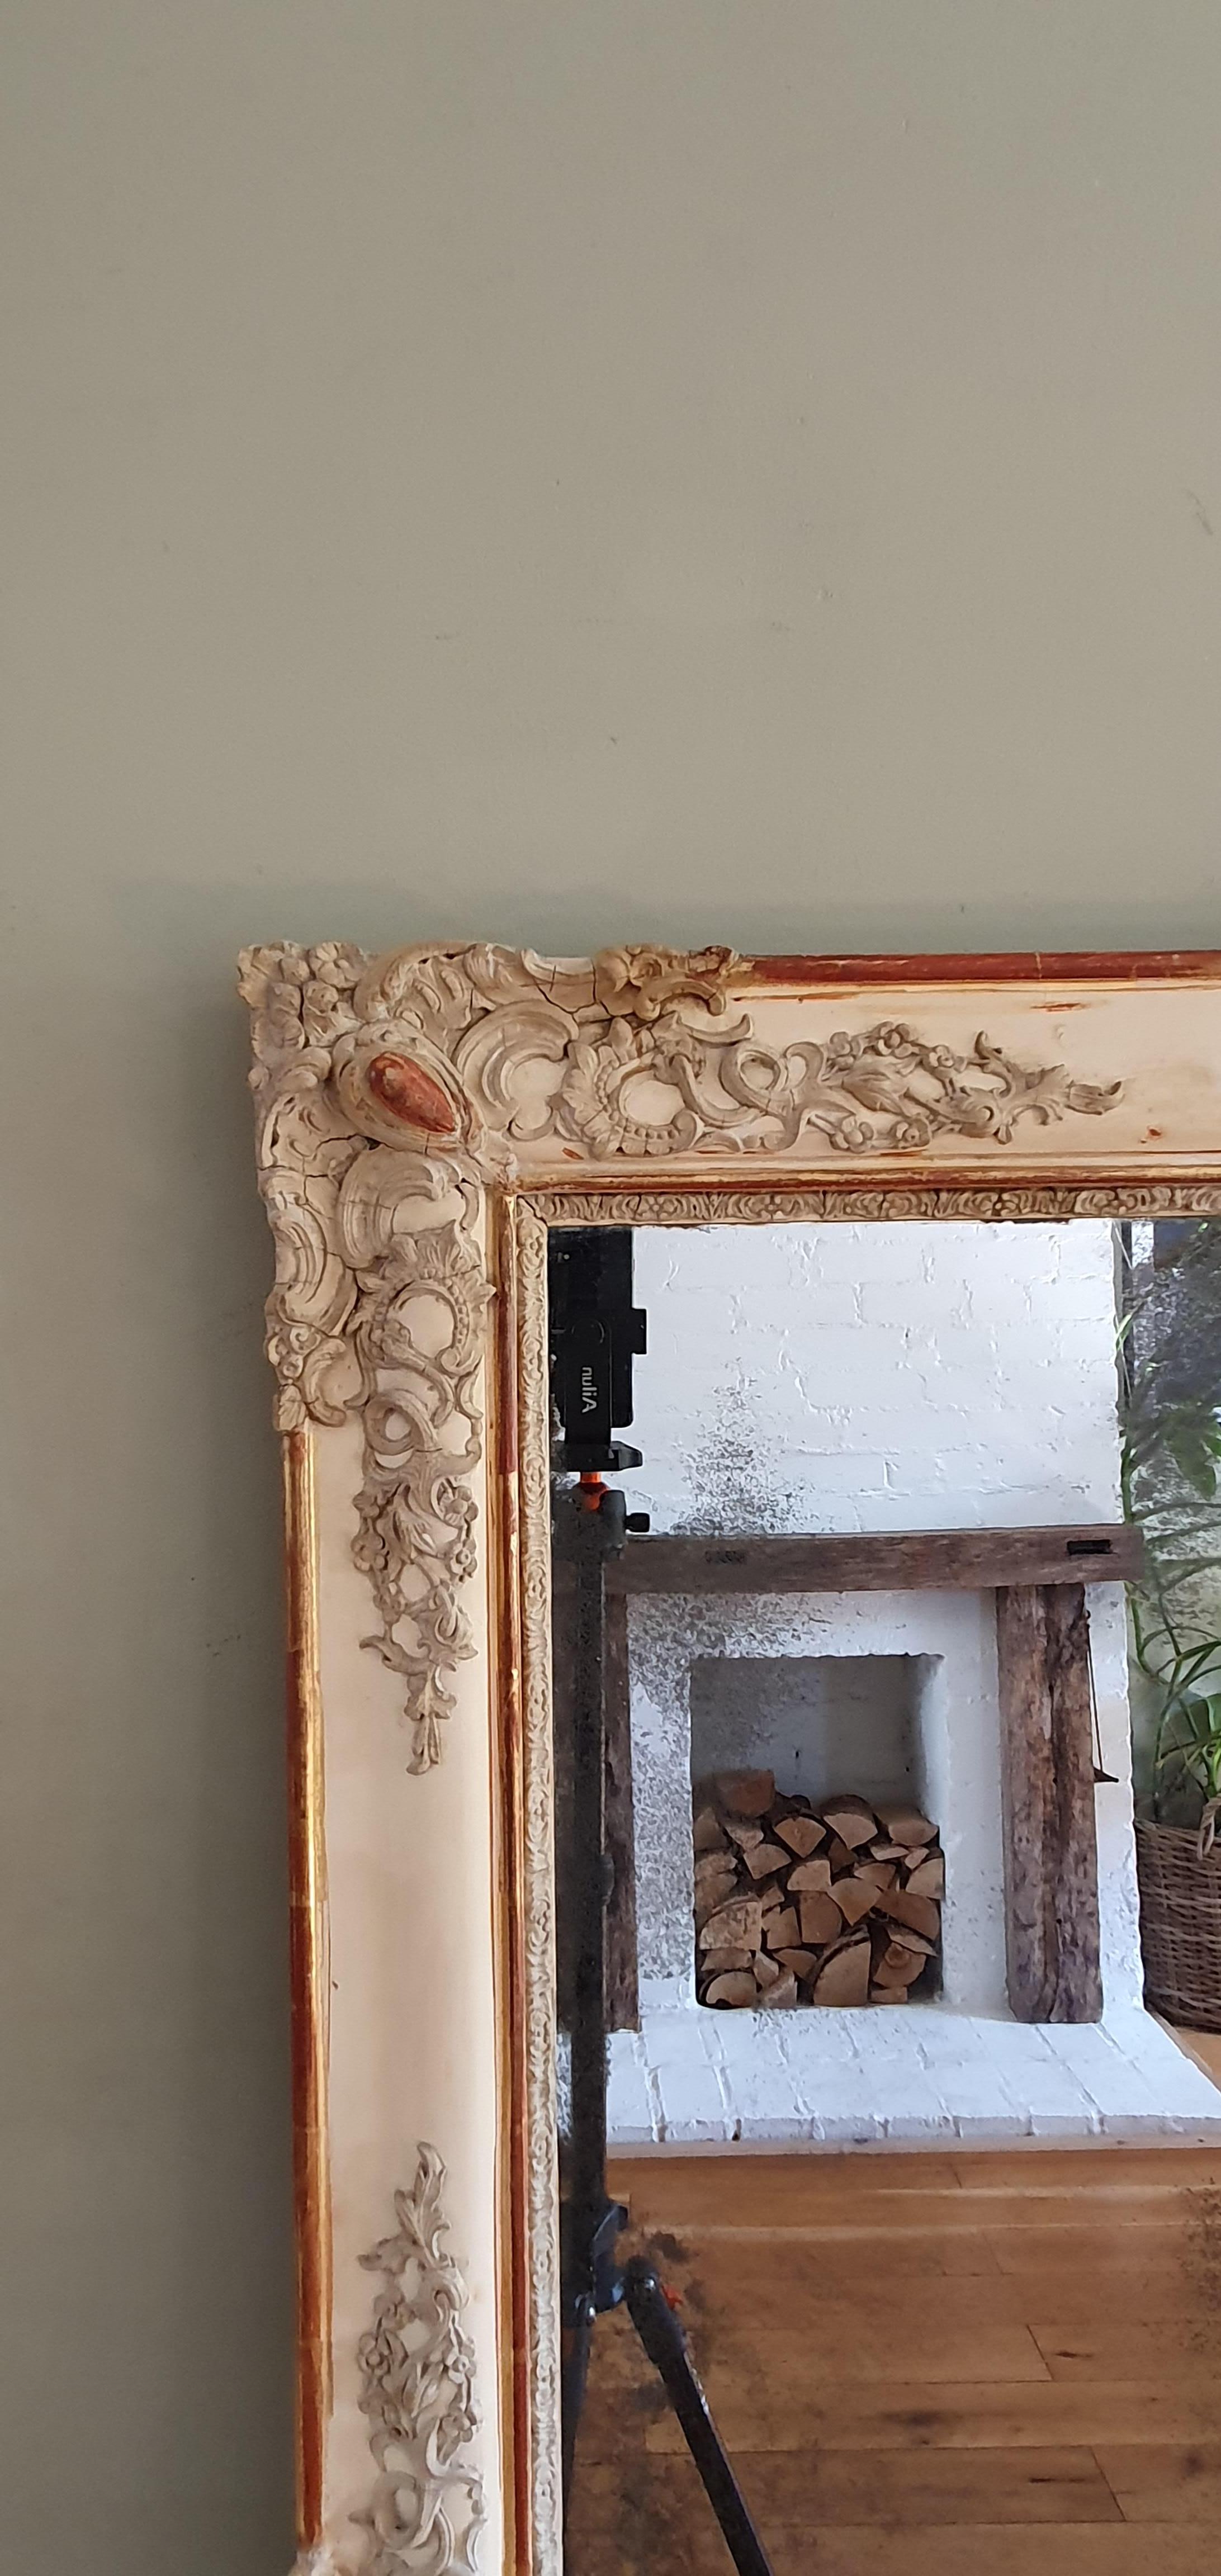 19th century French wall / mantel mirror. Distressed finish, some of original gilding remains, contains original mercury glass with signs of age (black spots, scratches etc). Very decorative with floral ornaments.